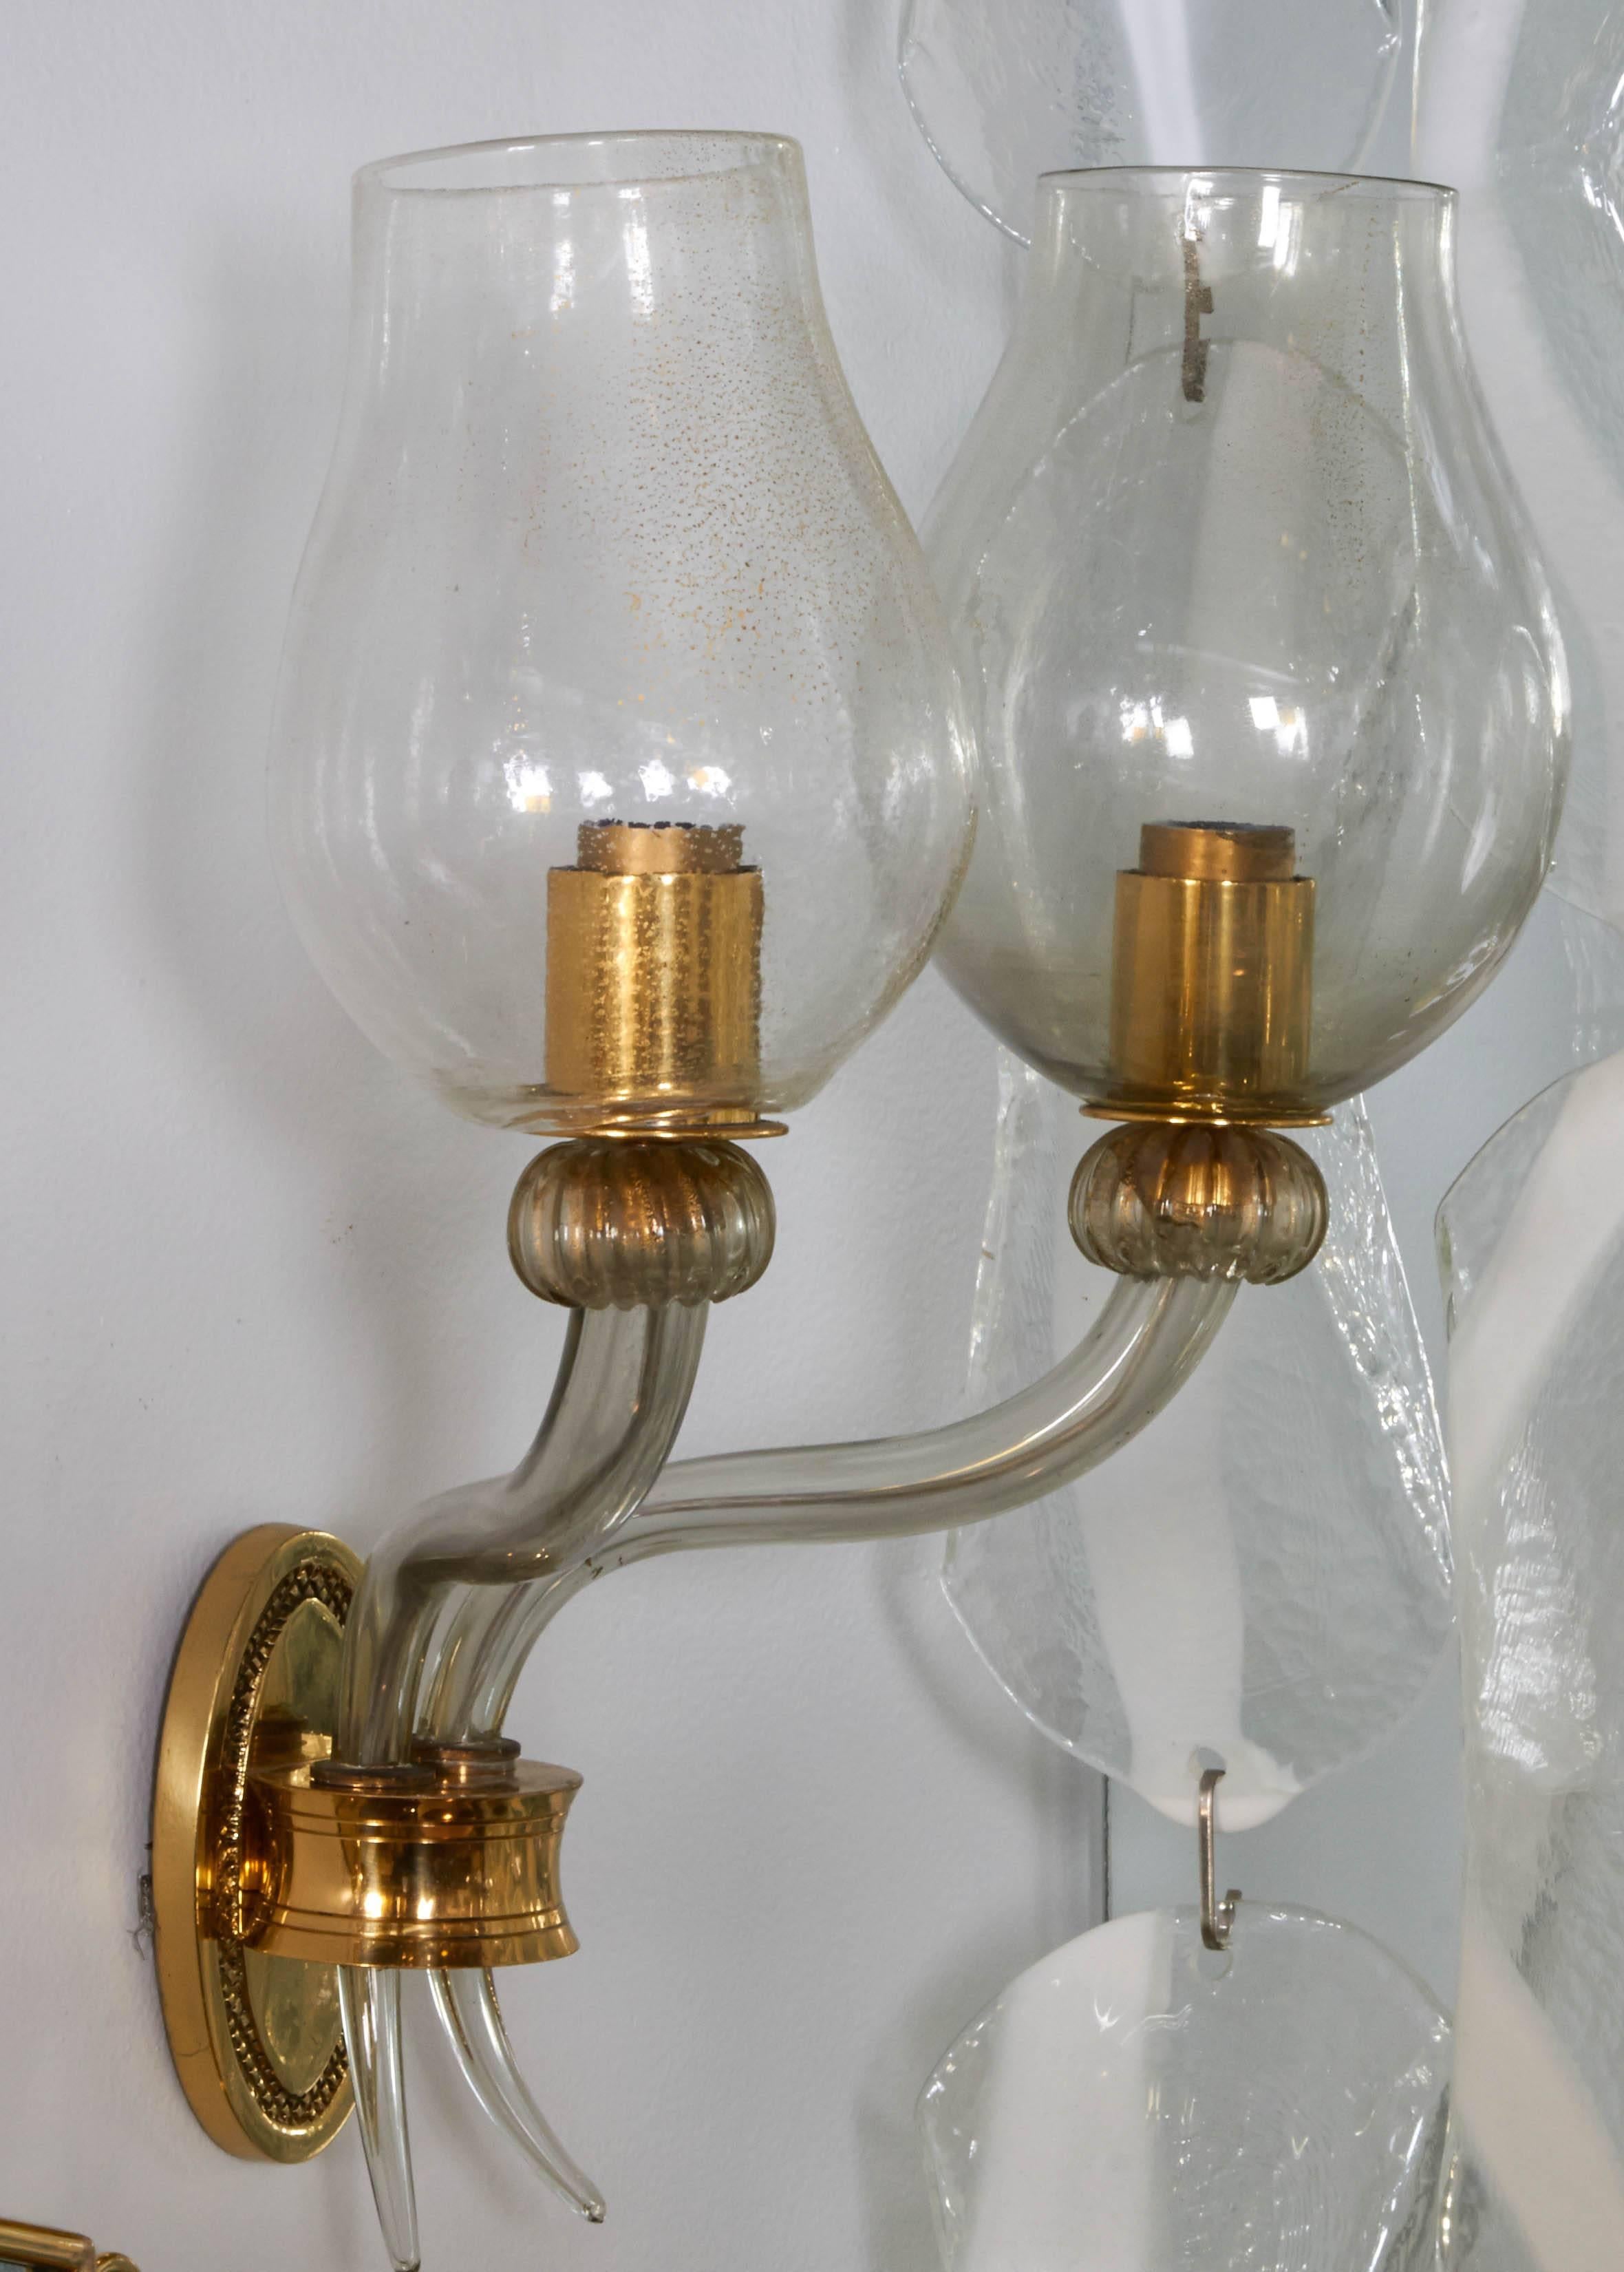 A single lovely Venetian hand blown glass two-light sconce, circa 1930-1940. Cast brass mount and socket covers. Hand blown grey with gold flecks aventurine glass. One shade paler in color than the other. Each shade is slightly different at they are